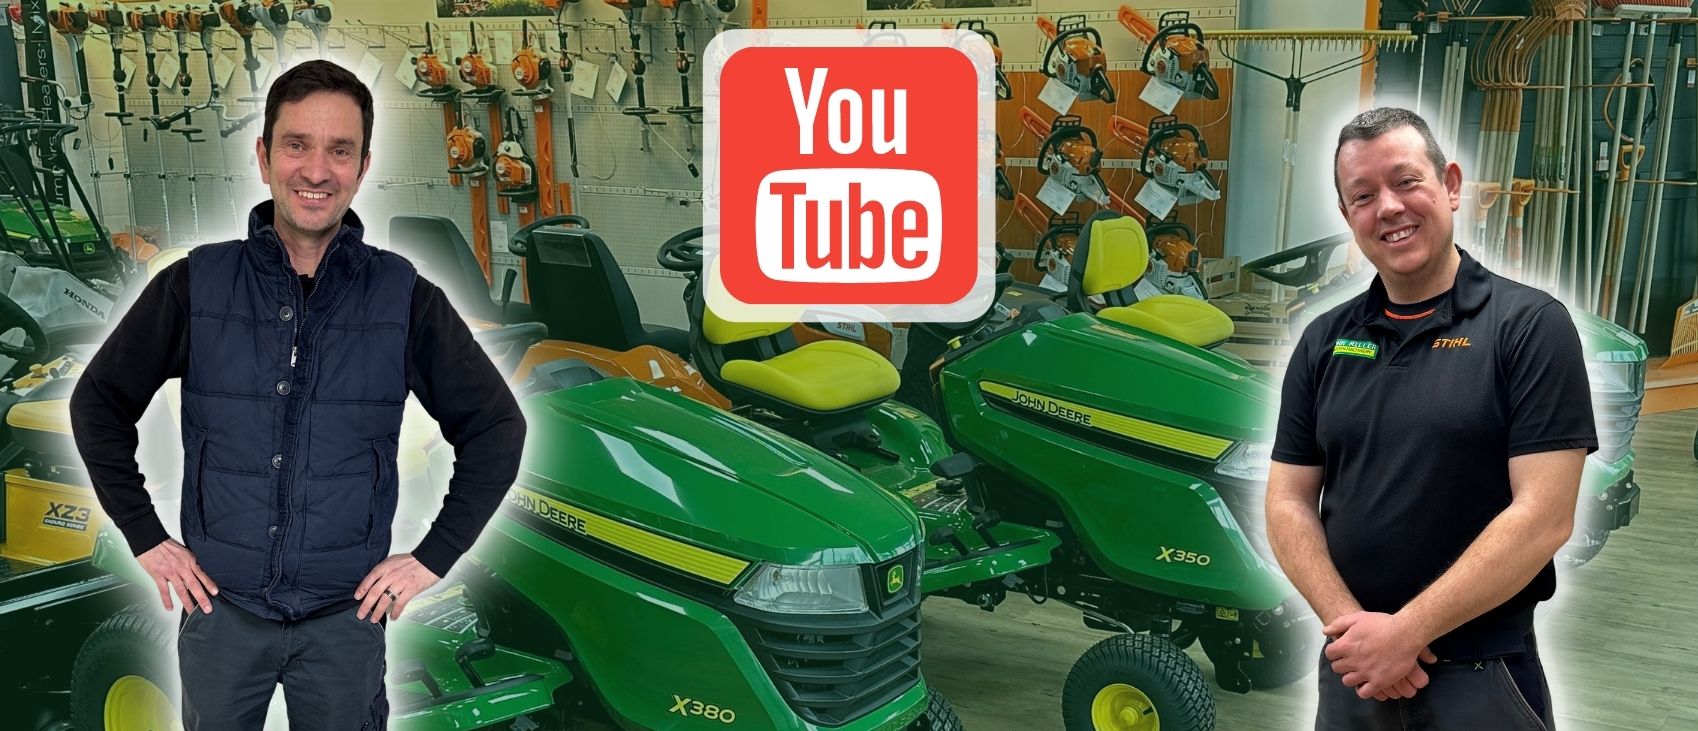 We are on YouTube! Find our channel at youtube.com/@johnmillergardenmachinery